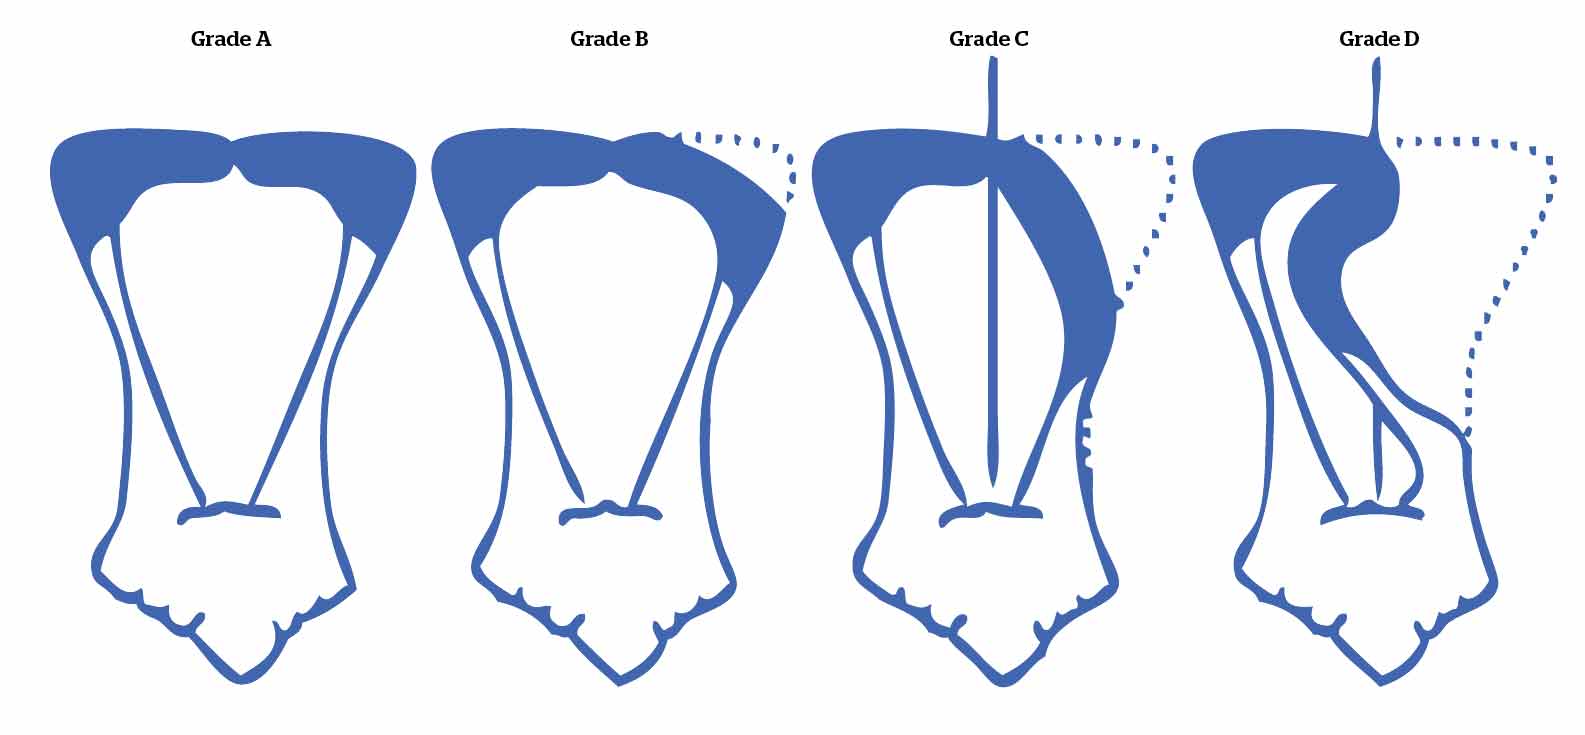 Figure 3. Laryngeal grading system at exercise. Grade A: full abduction of the arytenoid cartilages. Grade B: partial abduction (between full abduction and resting position). Grade C: abduction less than resting position. Grade D: collapse of the arytenoid past the sagittal line dividing the rima glottidis. Image: recreated from Rossignol et al, 2018.